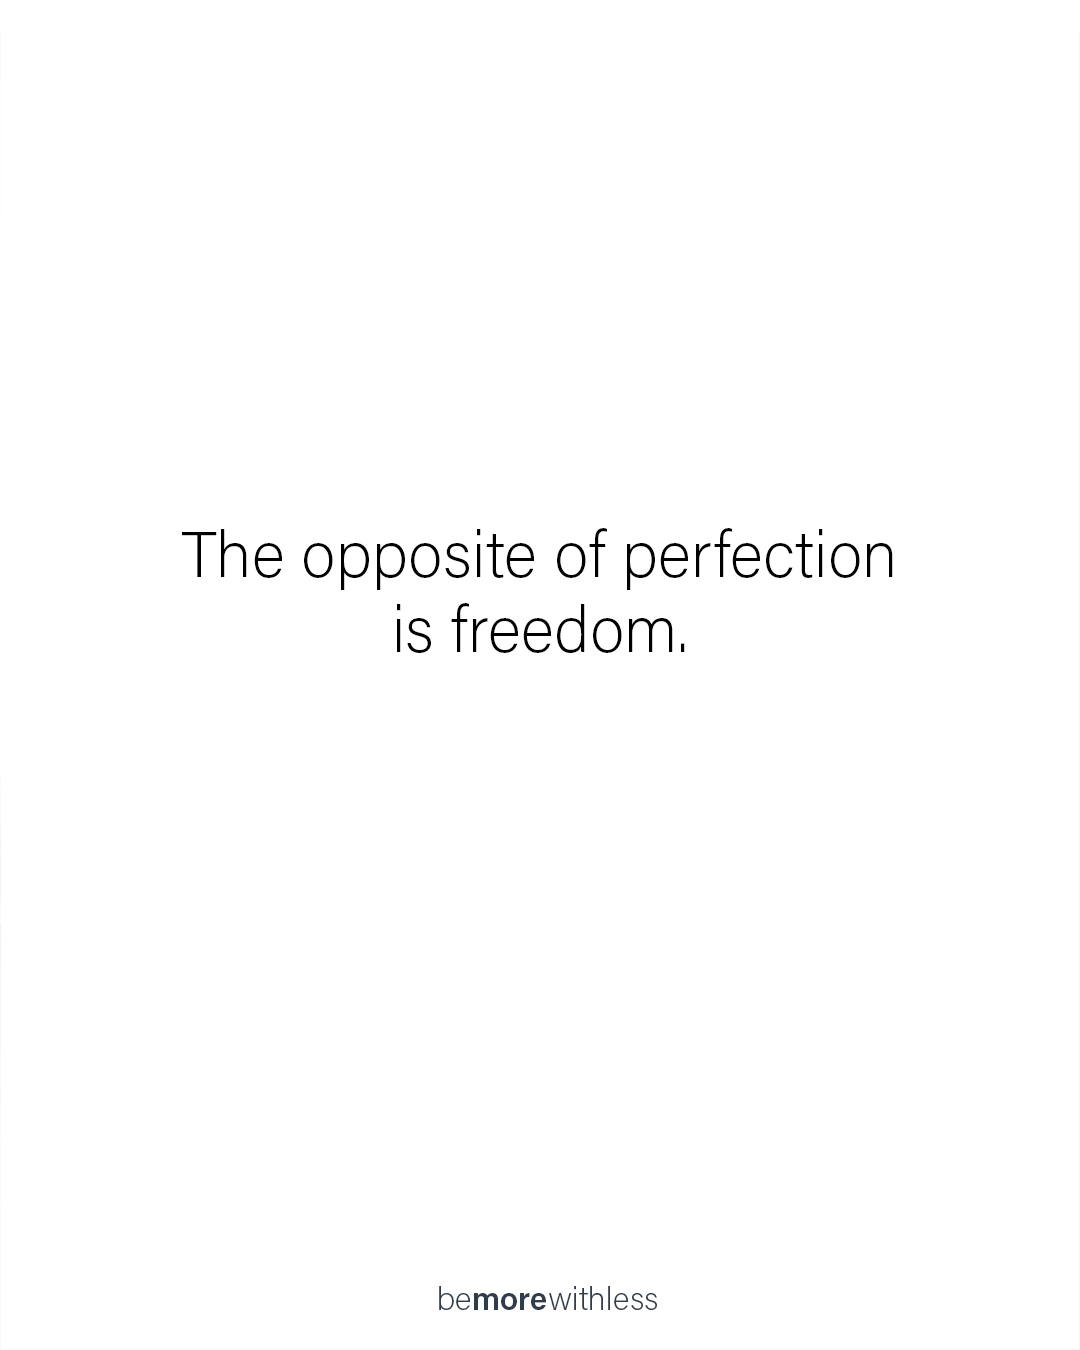 Choose freedom over perfection